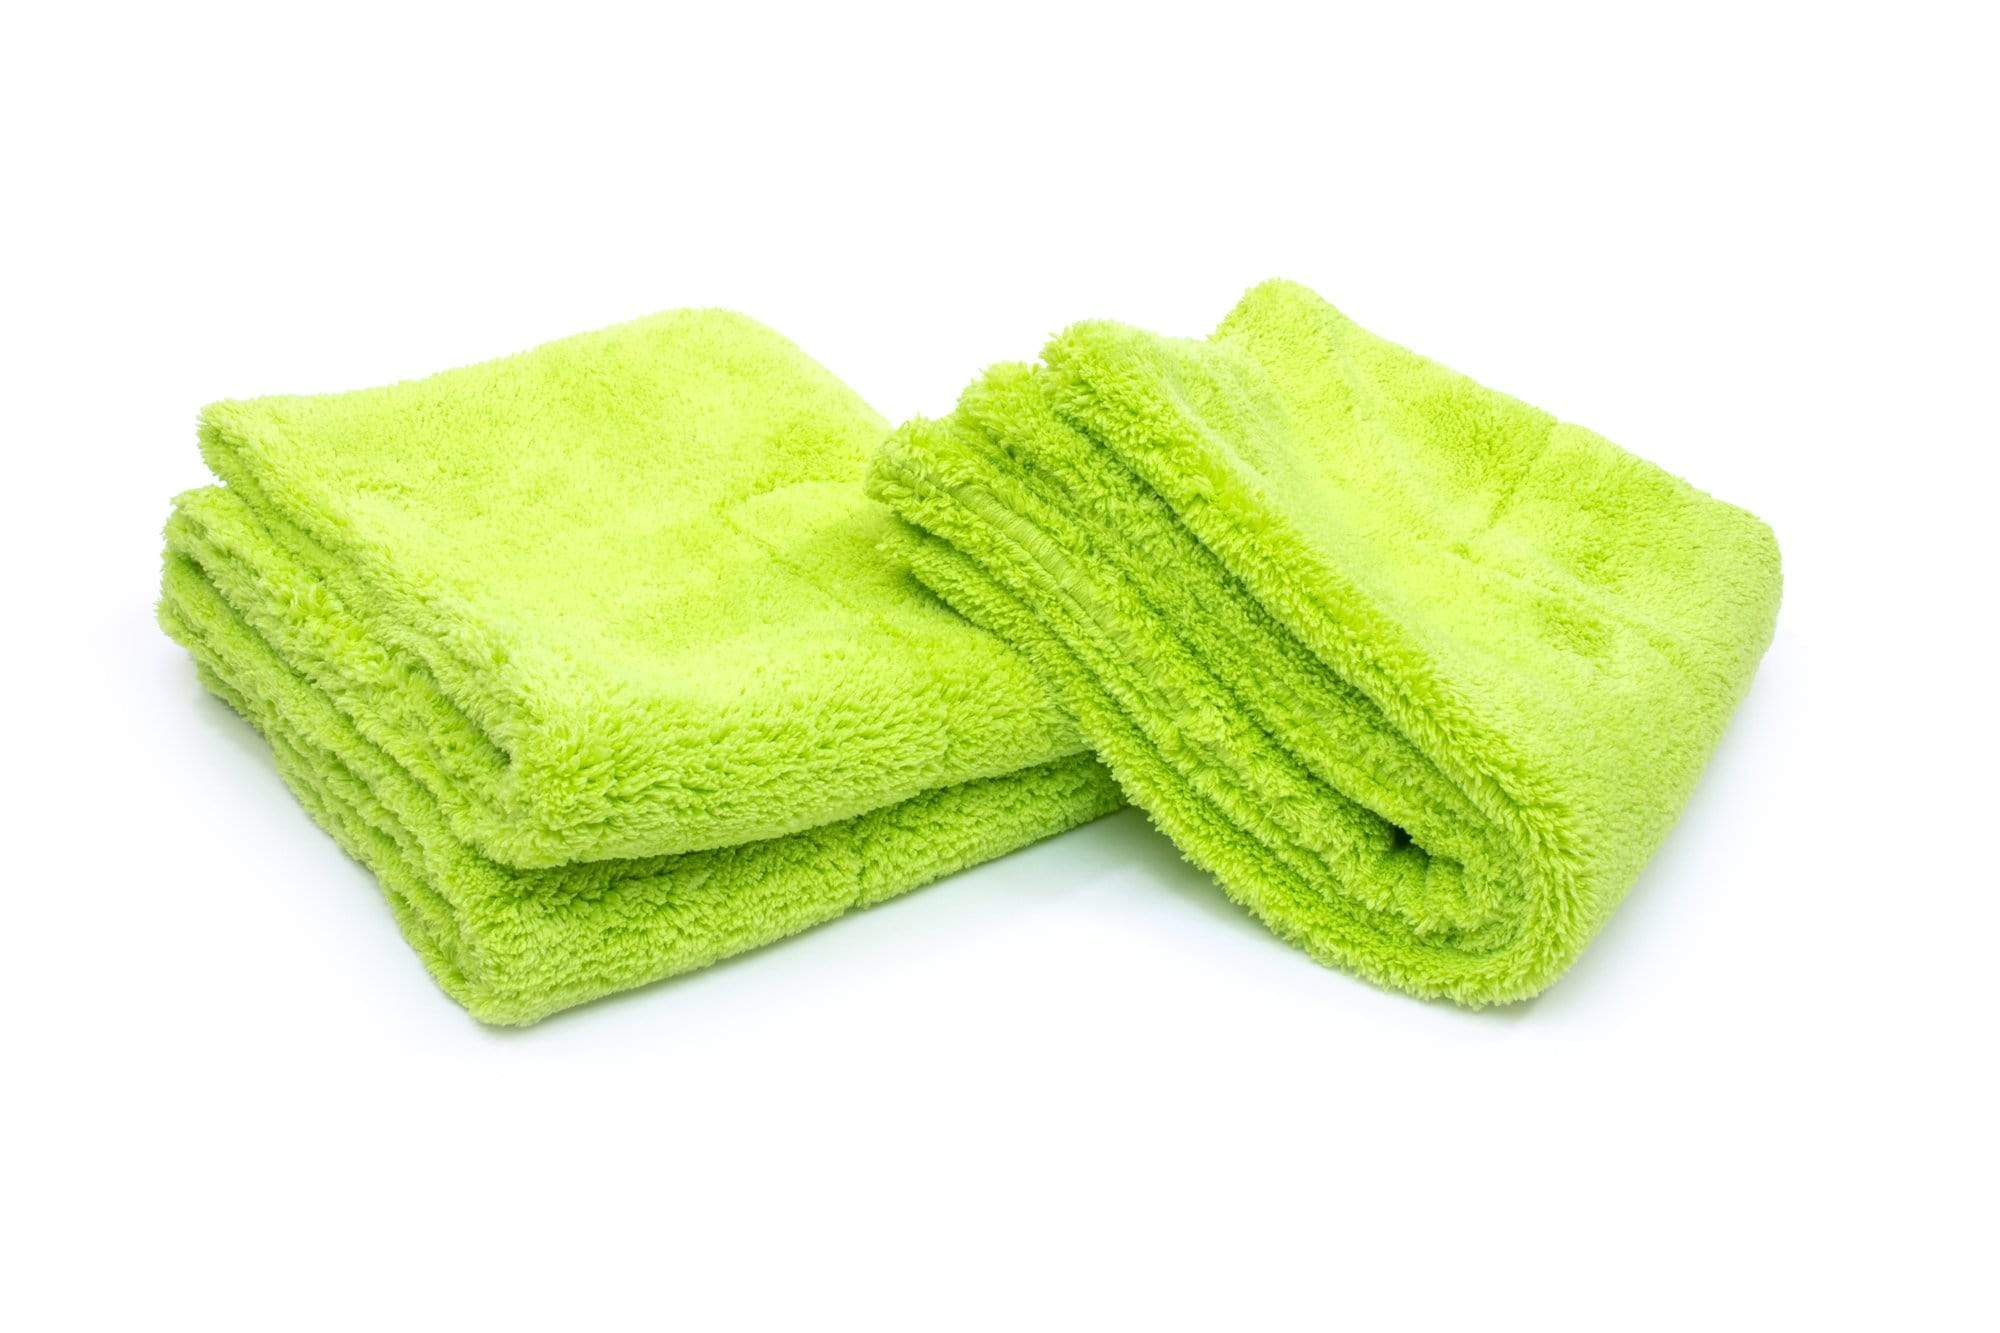 Extra Thick & Soft Microfiber Towels, Large 16 x 16 Plush